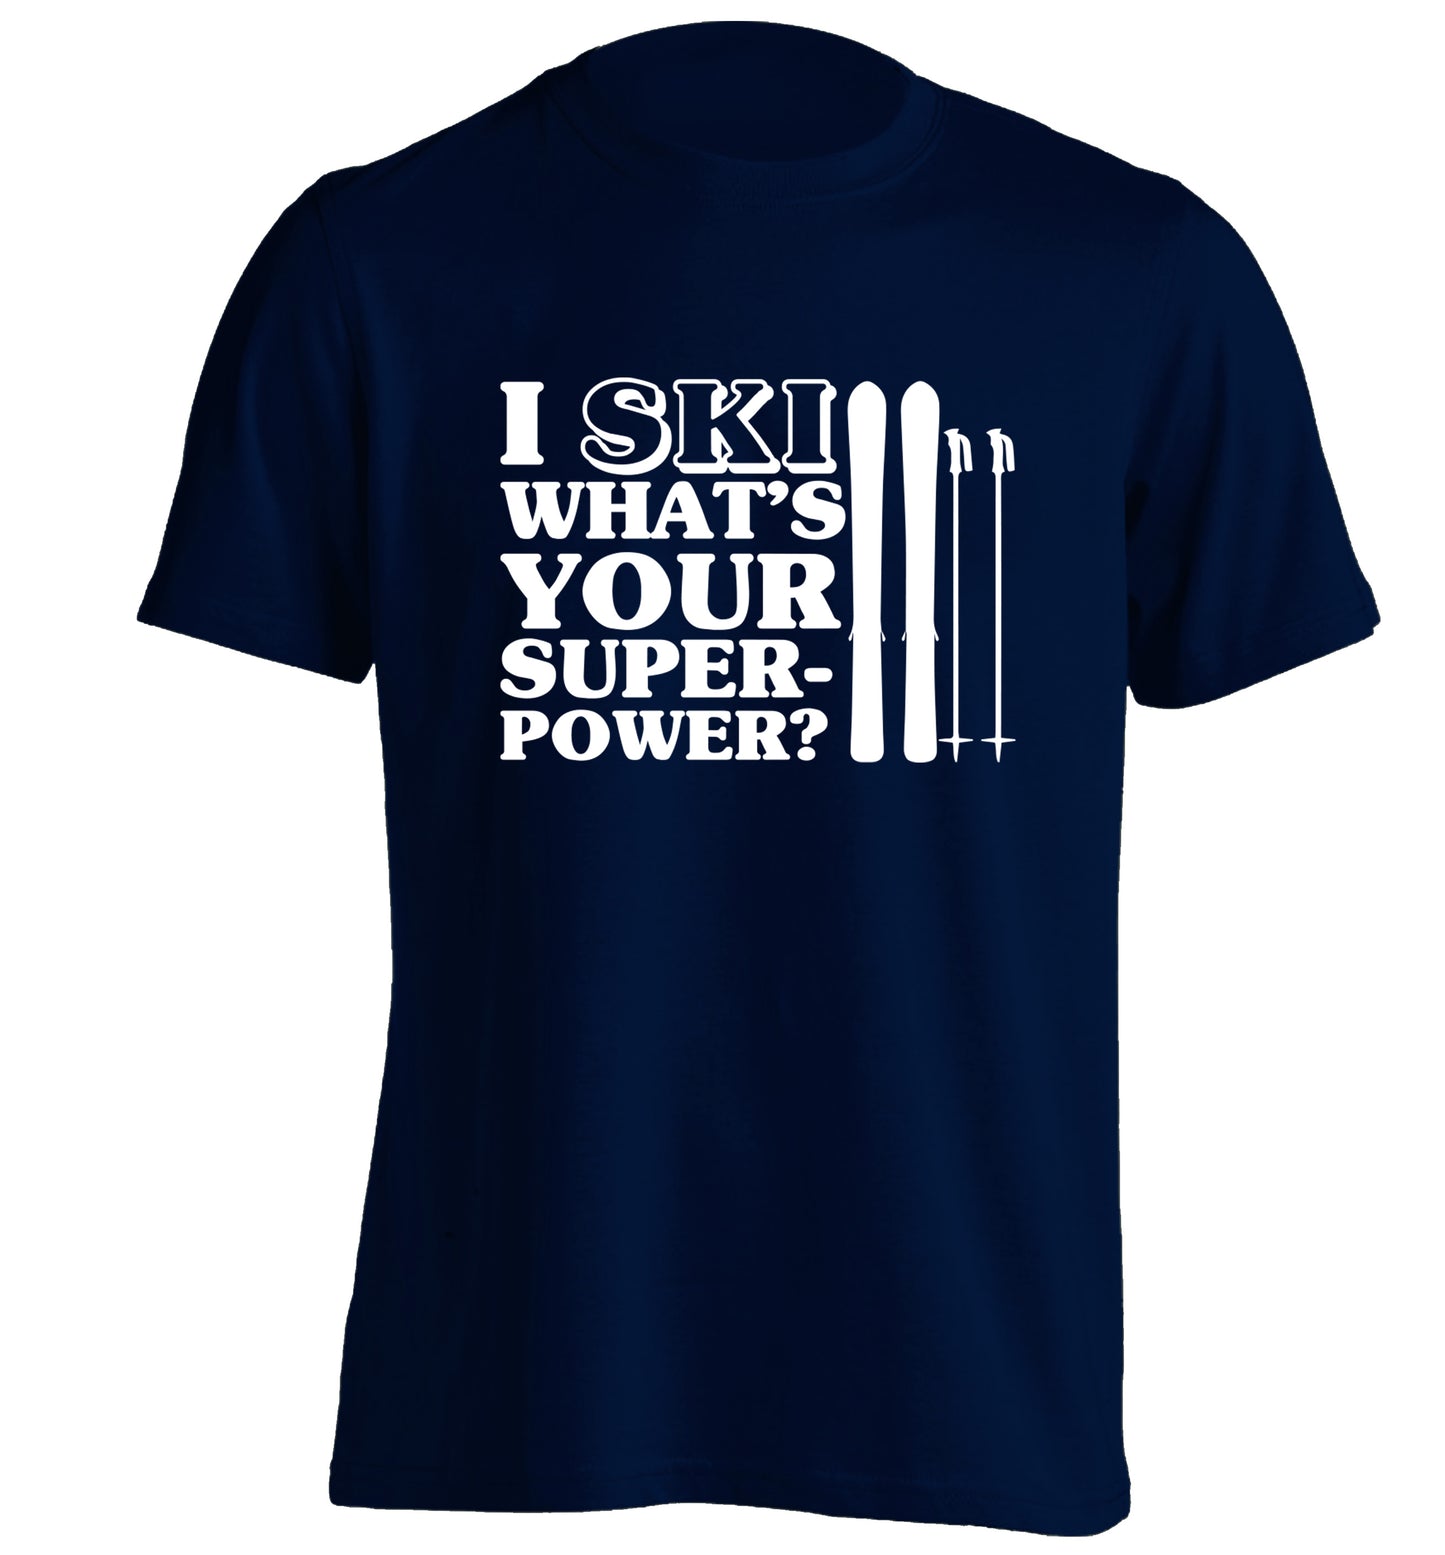 I ski what's your superpower? adults unisexnavy Tshirt 2XL